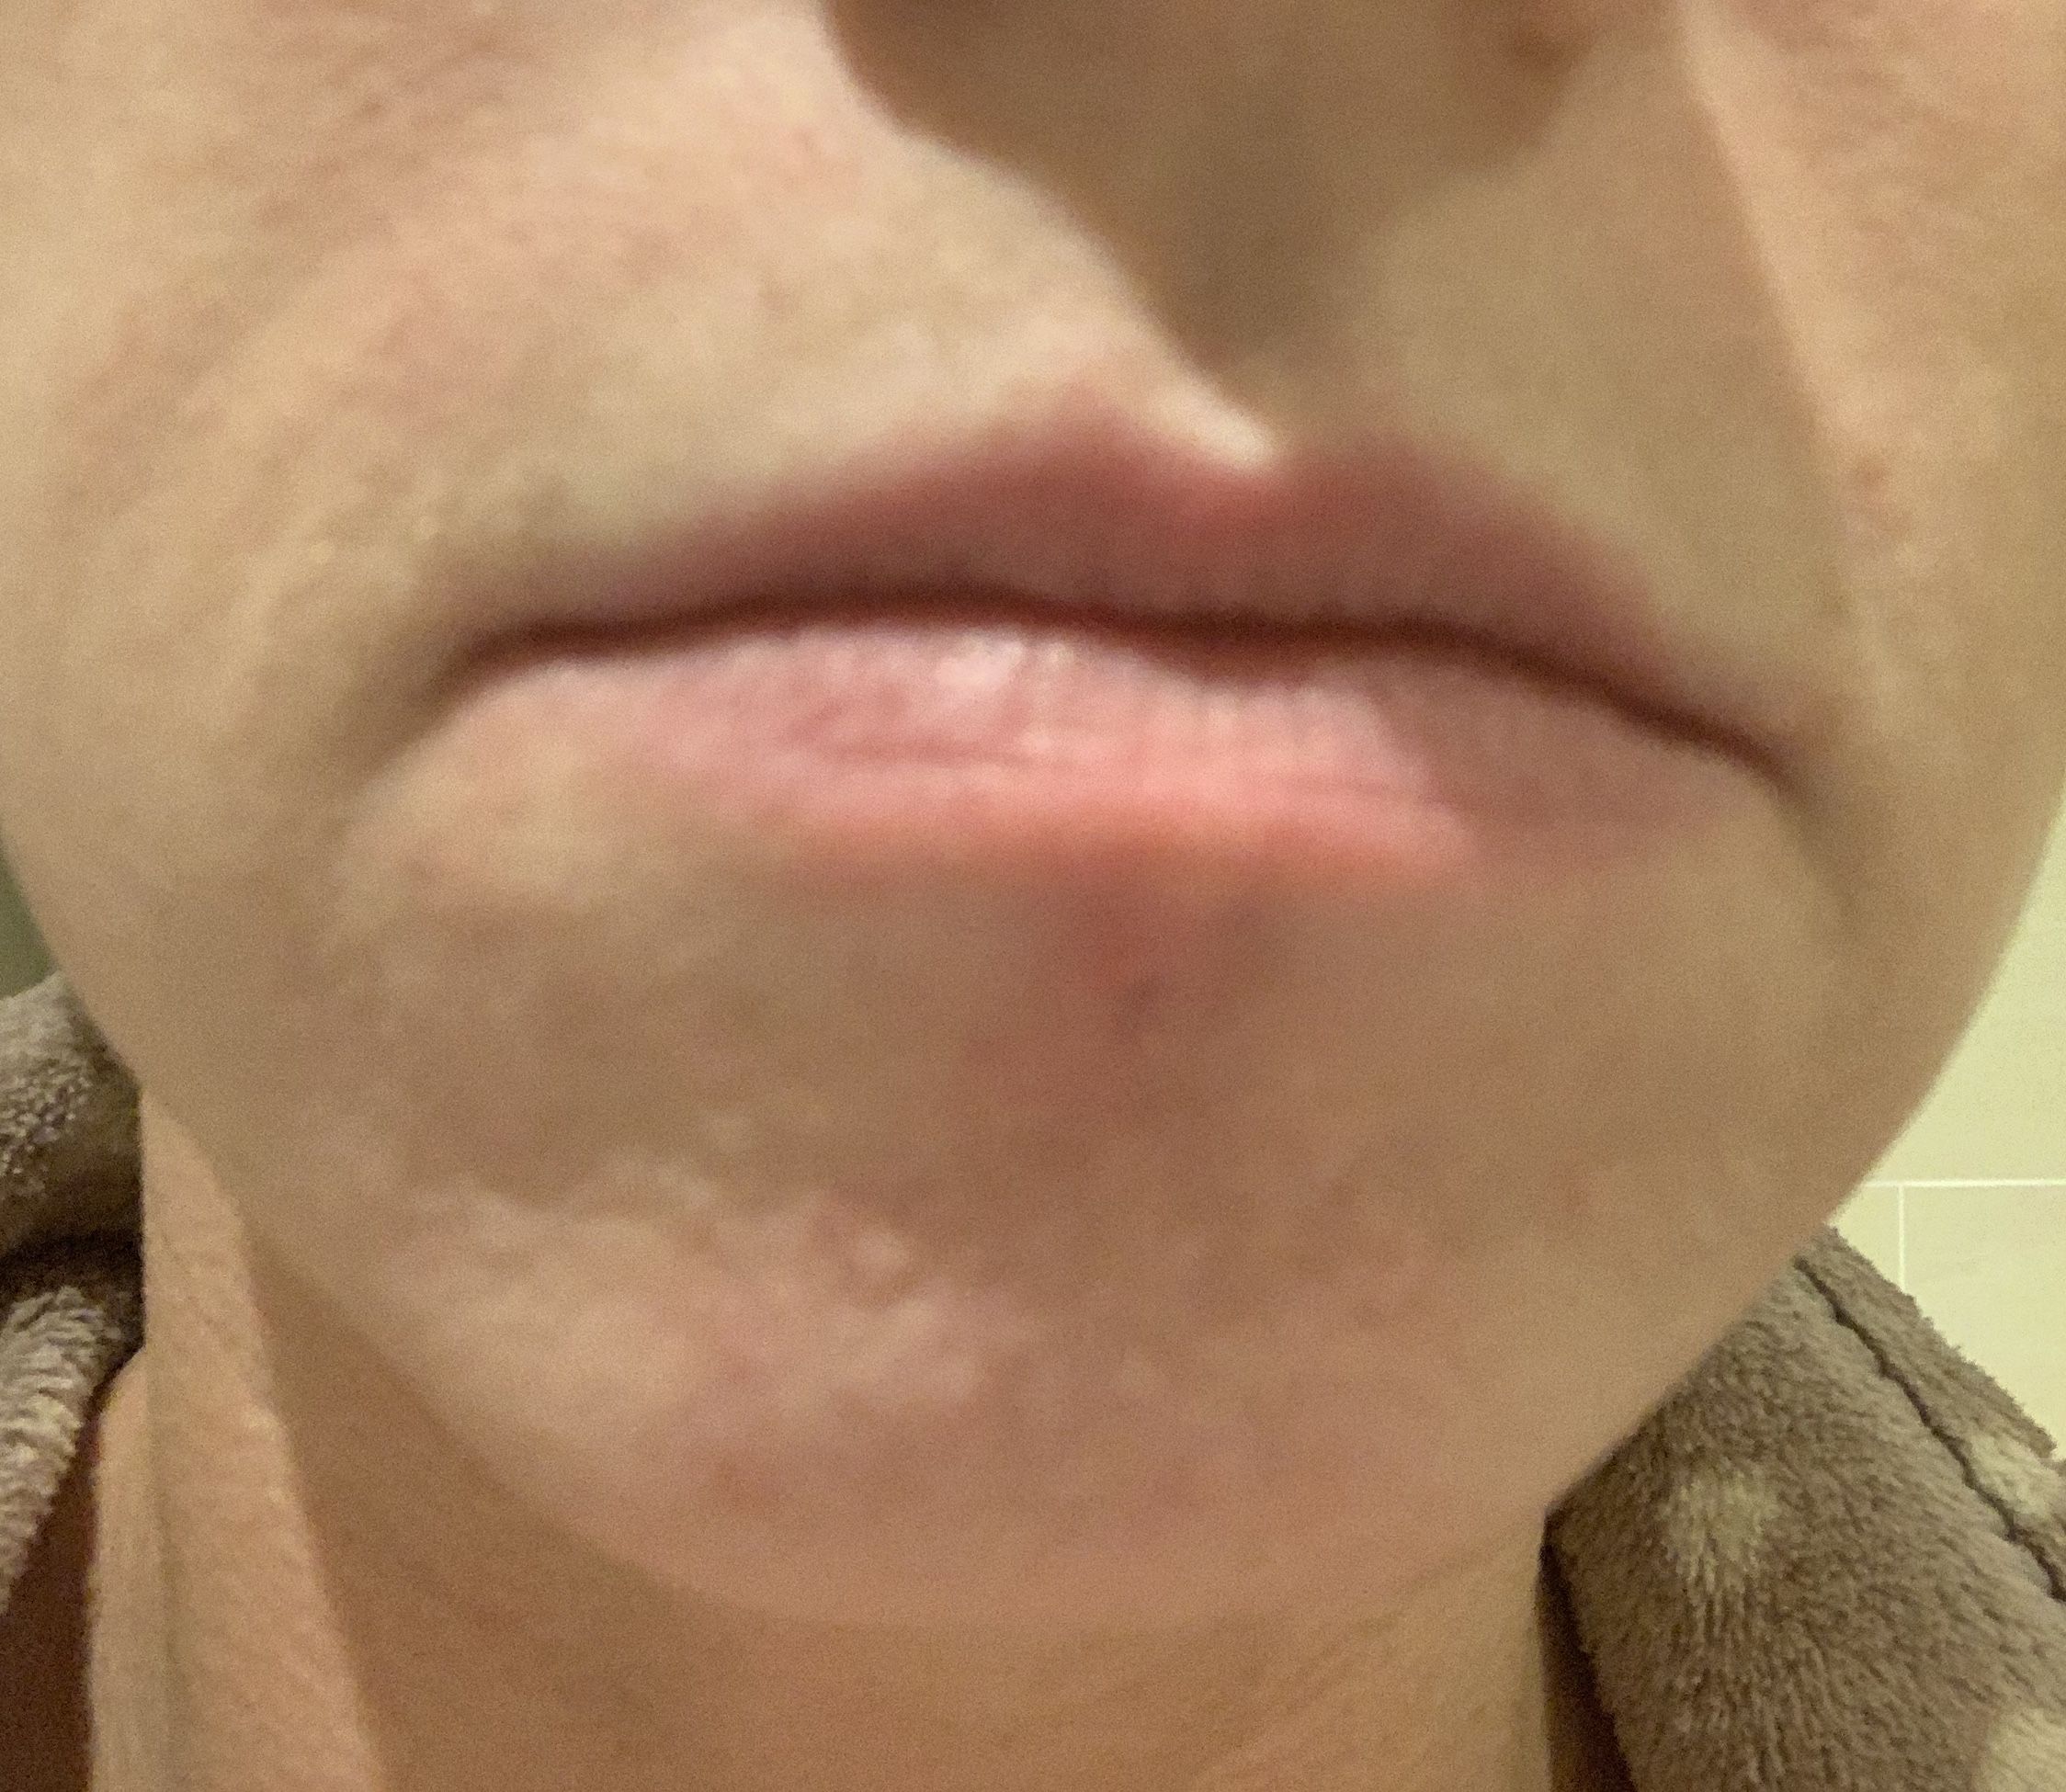 Skin Colored Bumps On Chin Treatment Hypertrophic Raised Scars Acne Org Forum